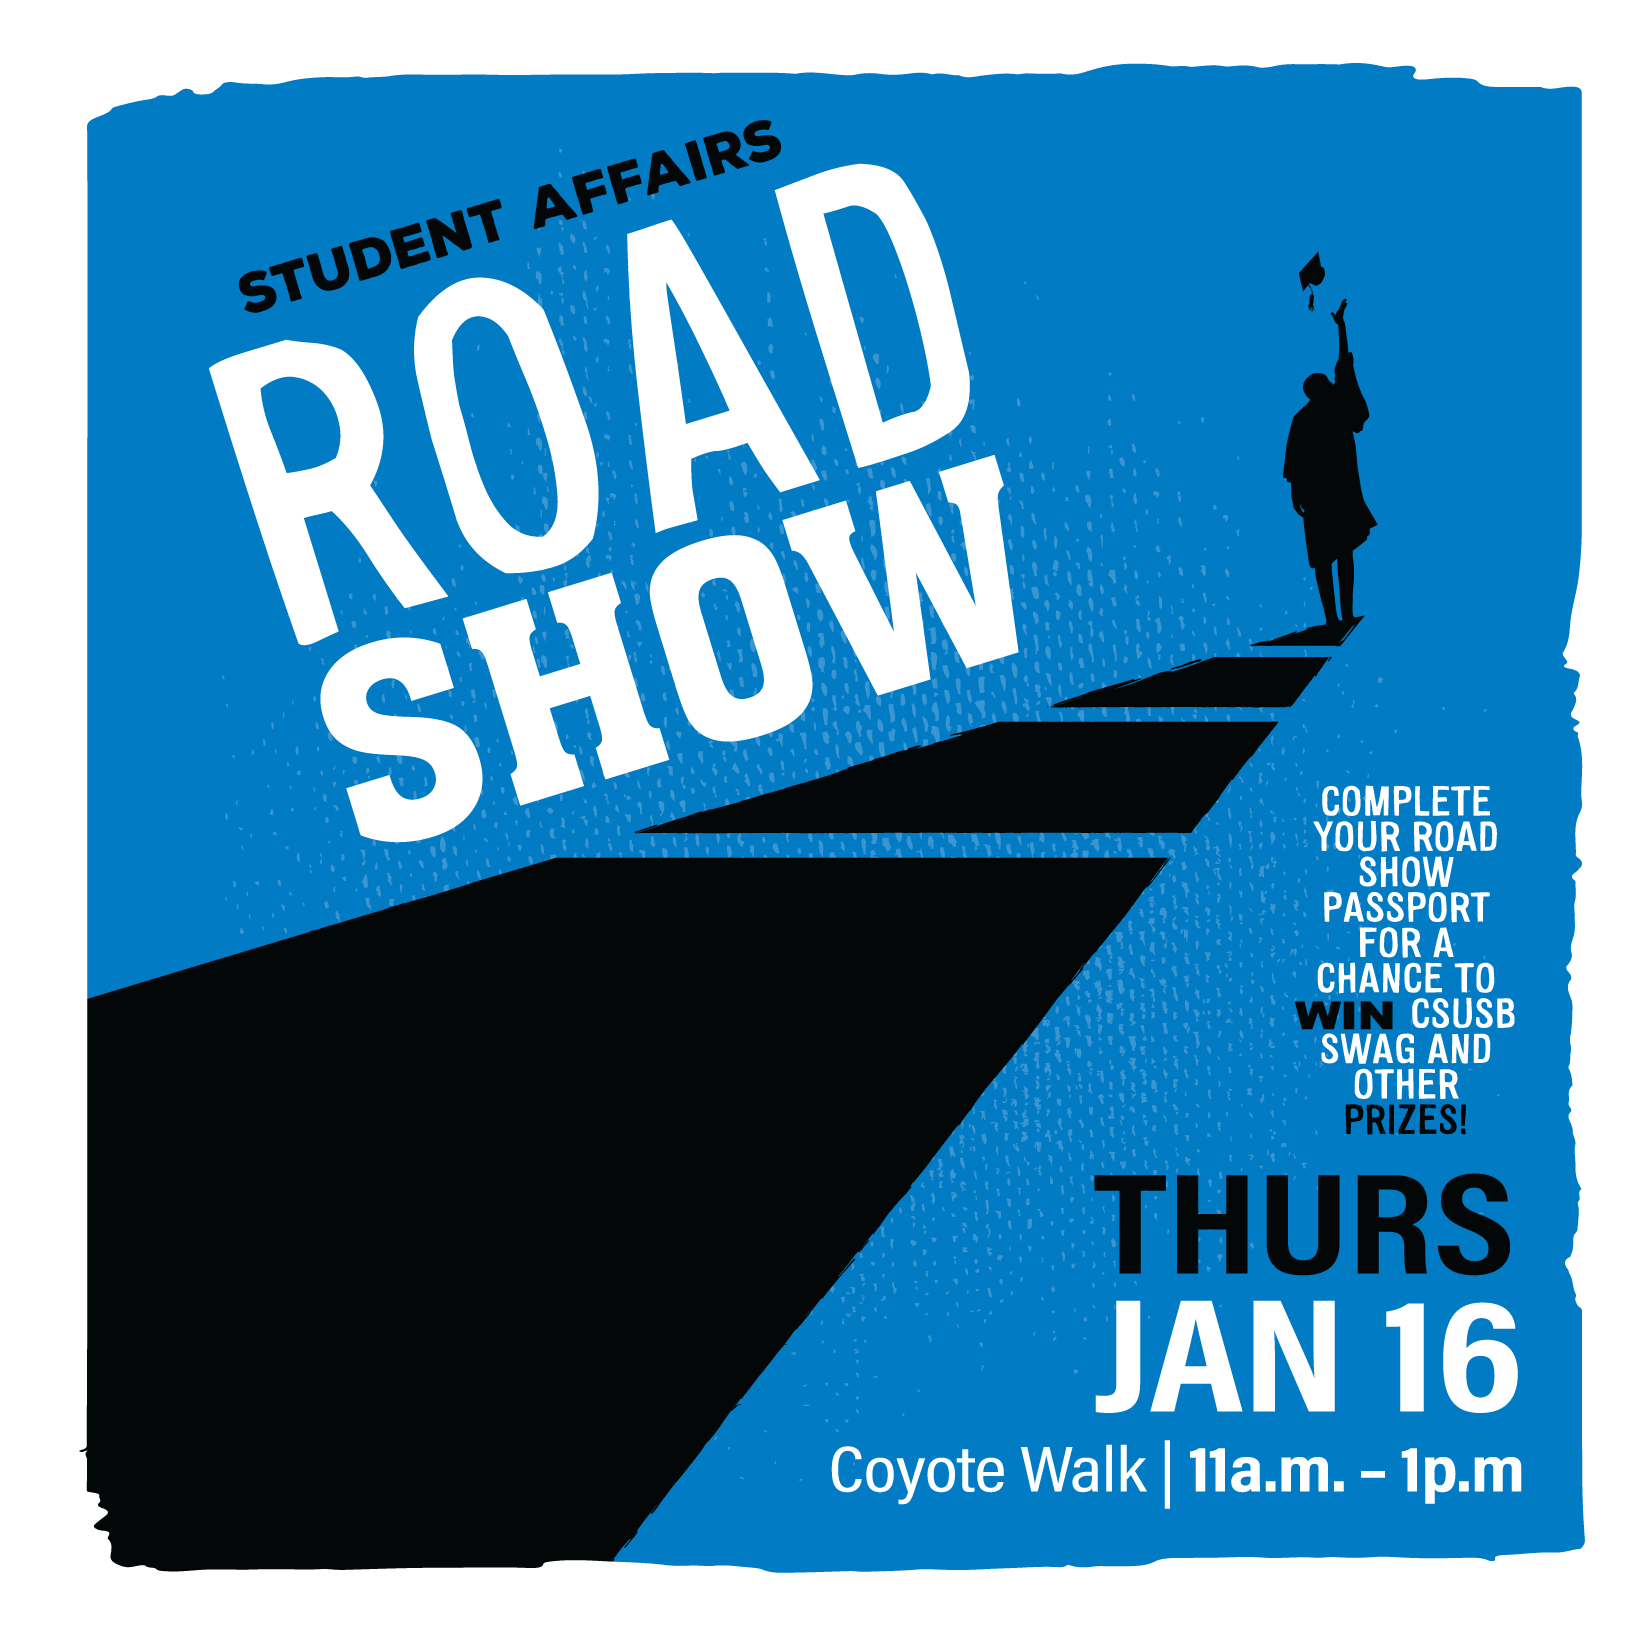 Student Affairs Road Show 